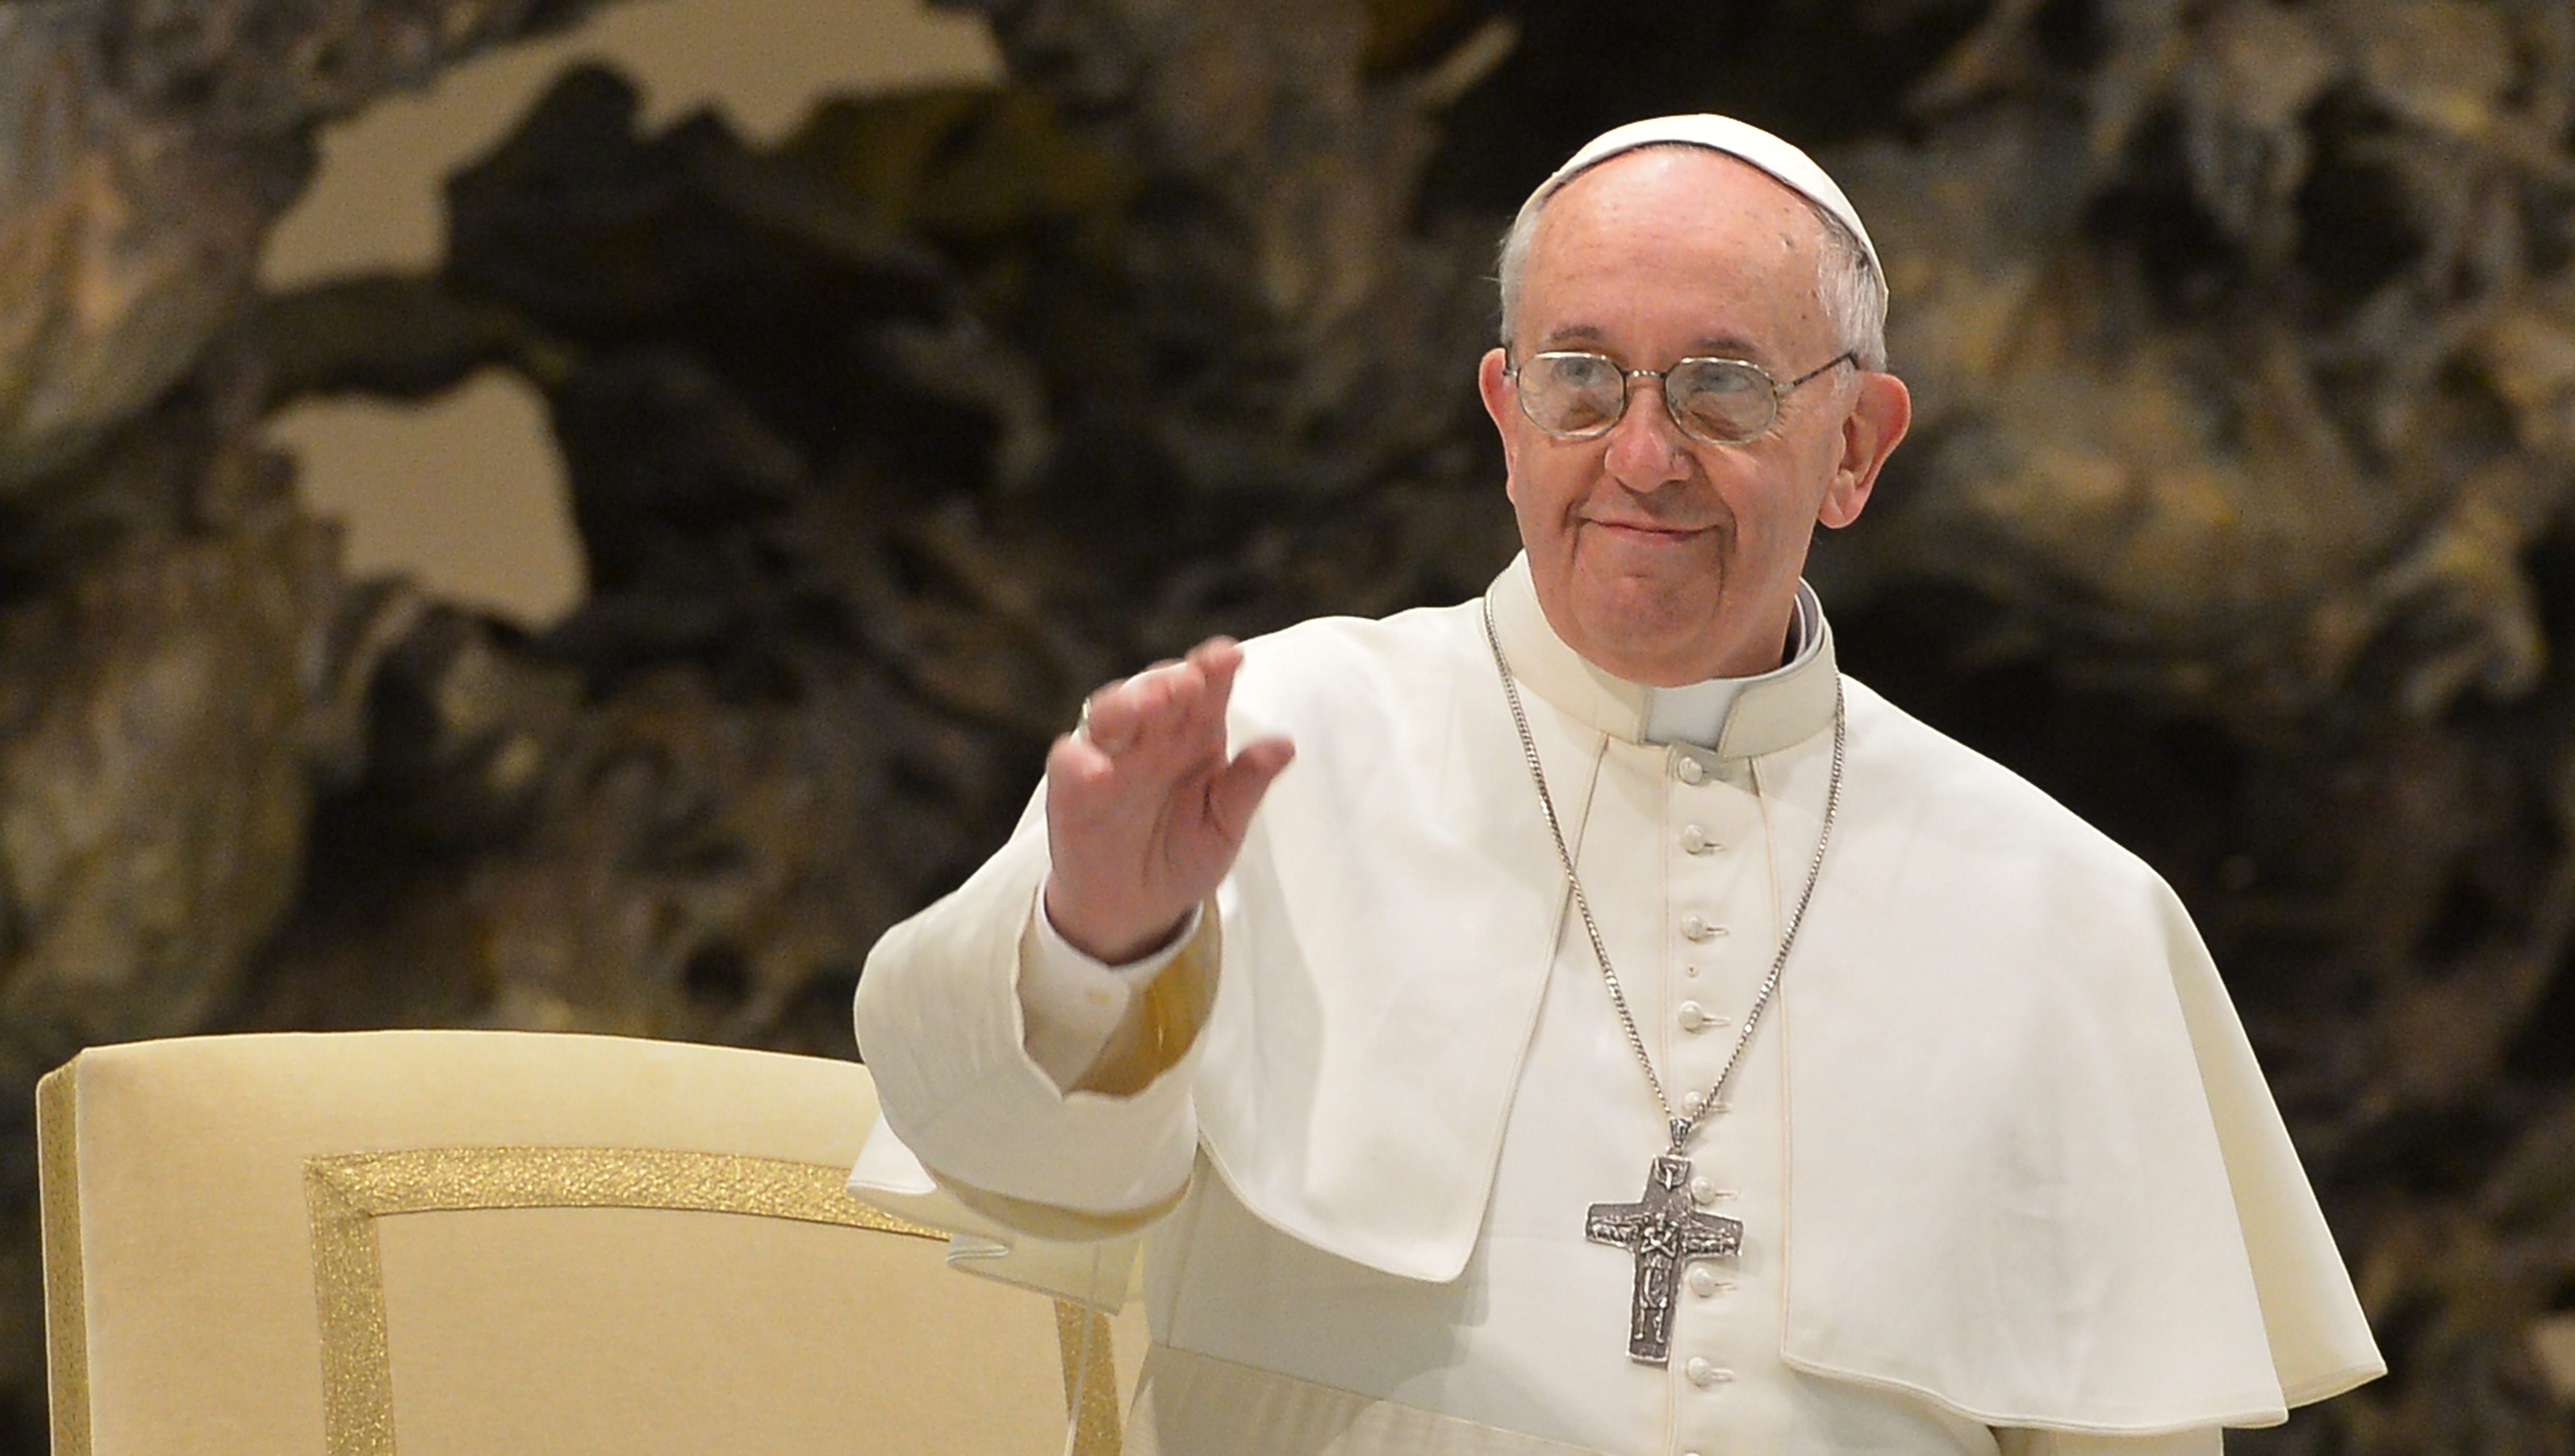 Pope Francis charms in first address